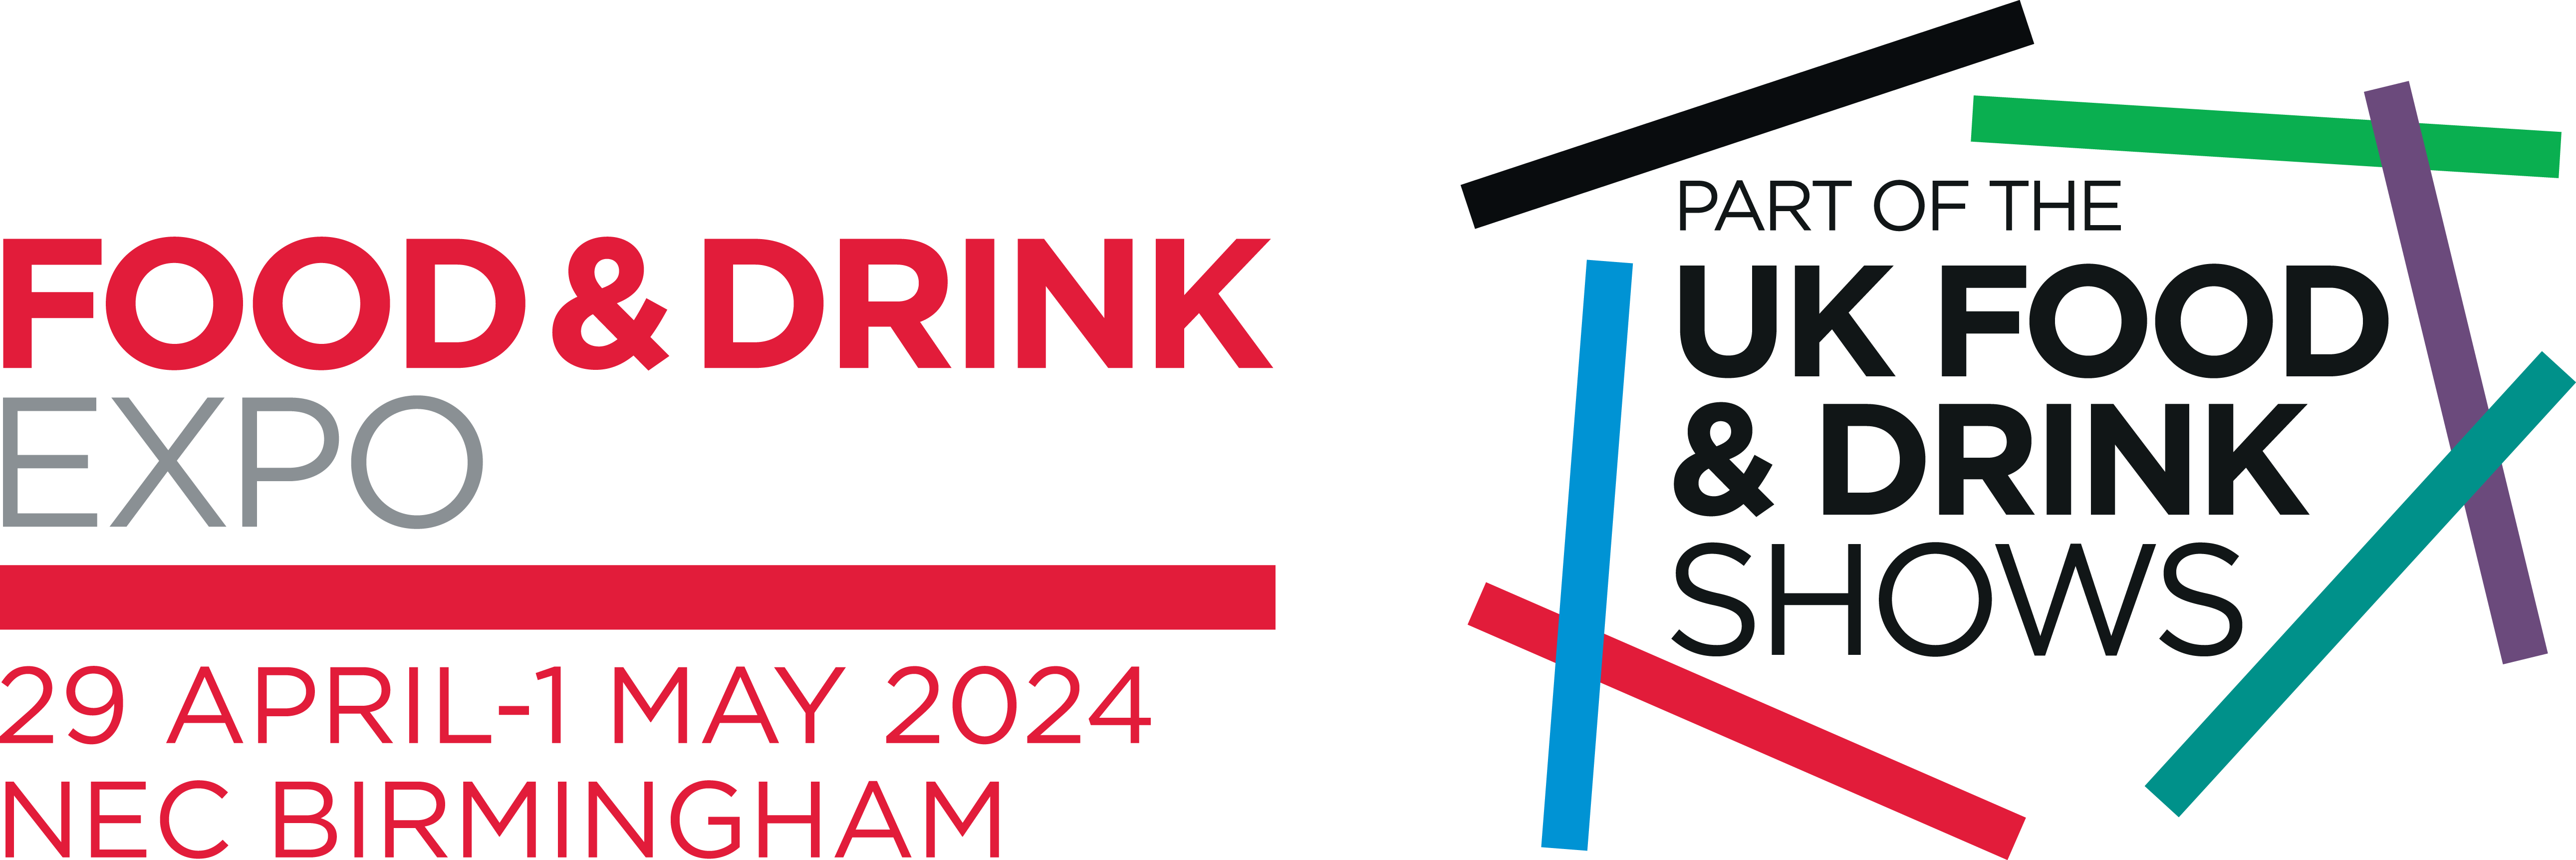 Food and Drink expo logo